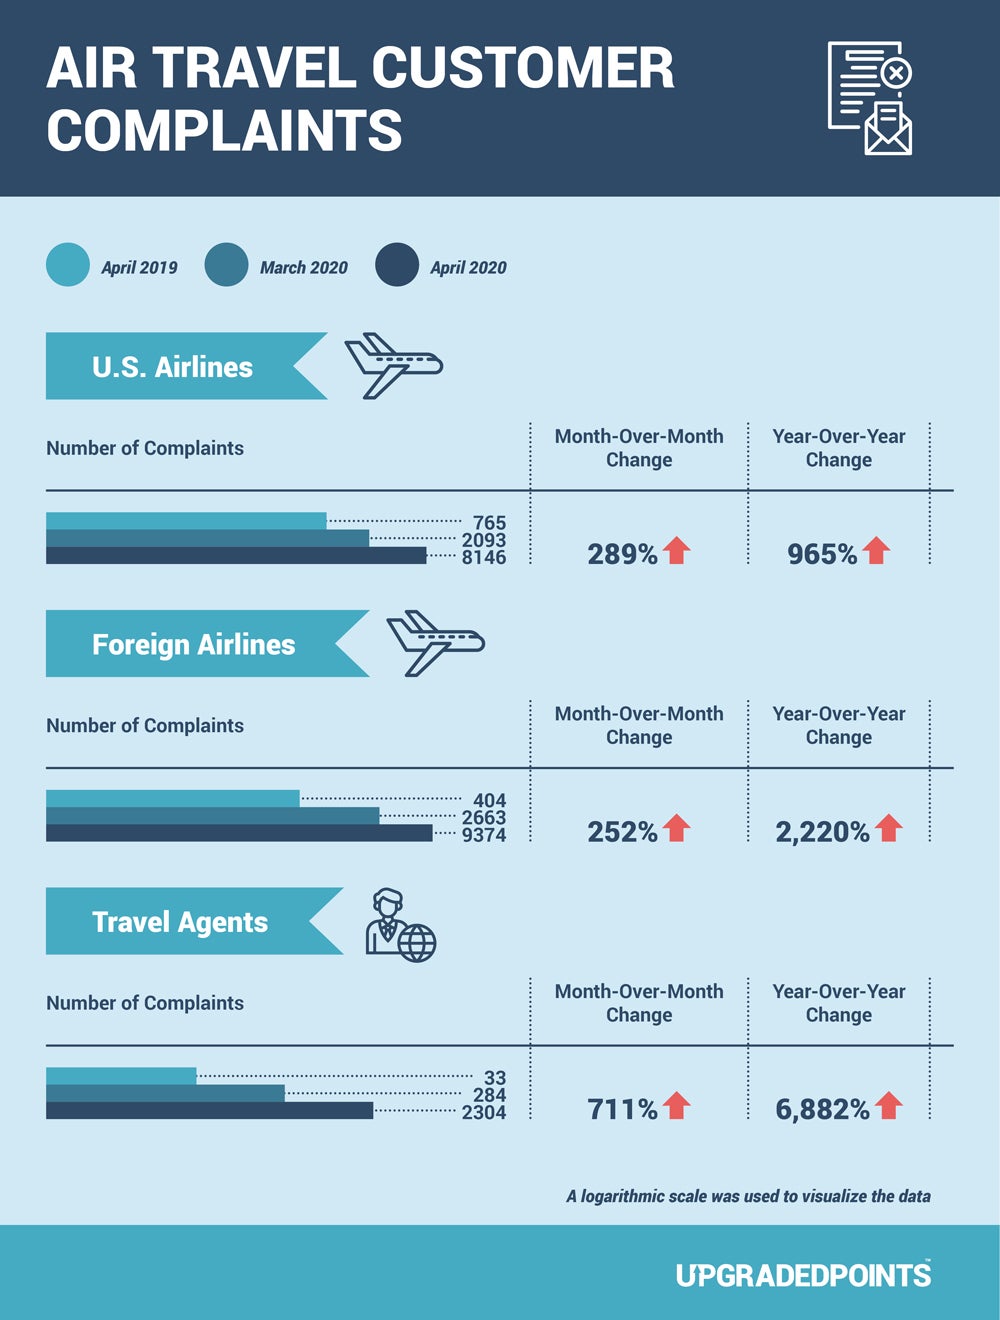 Airline complaints summary